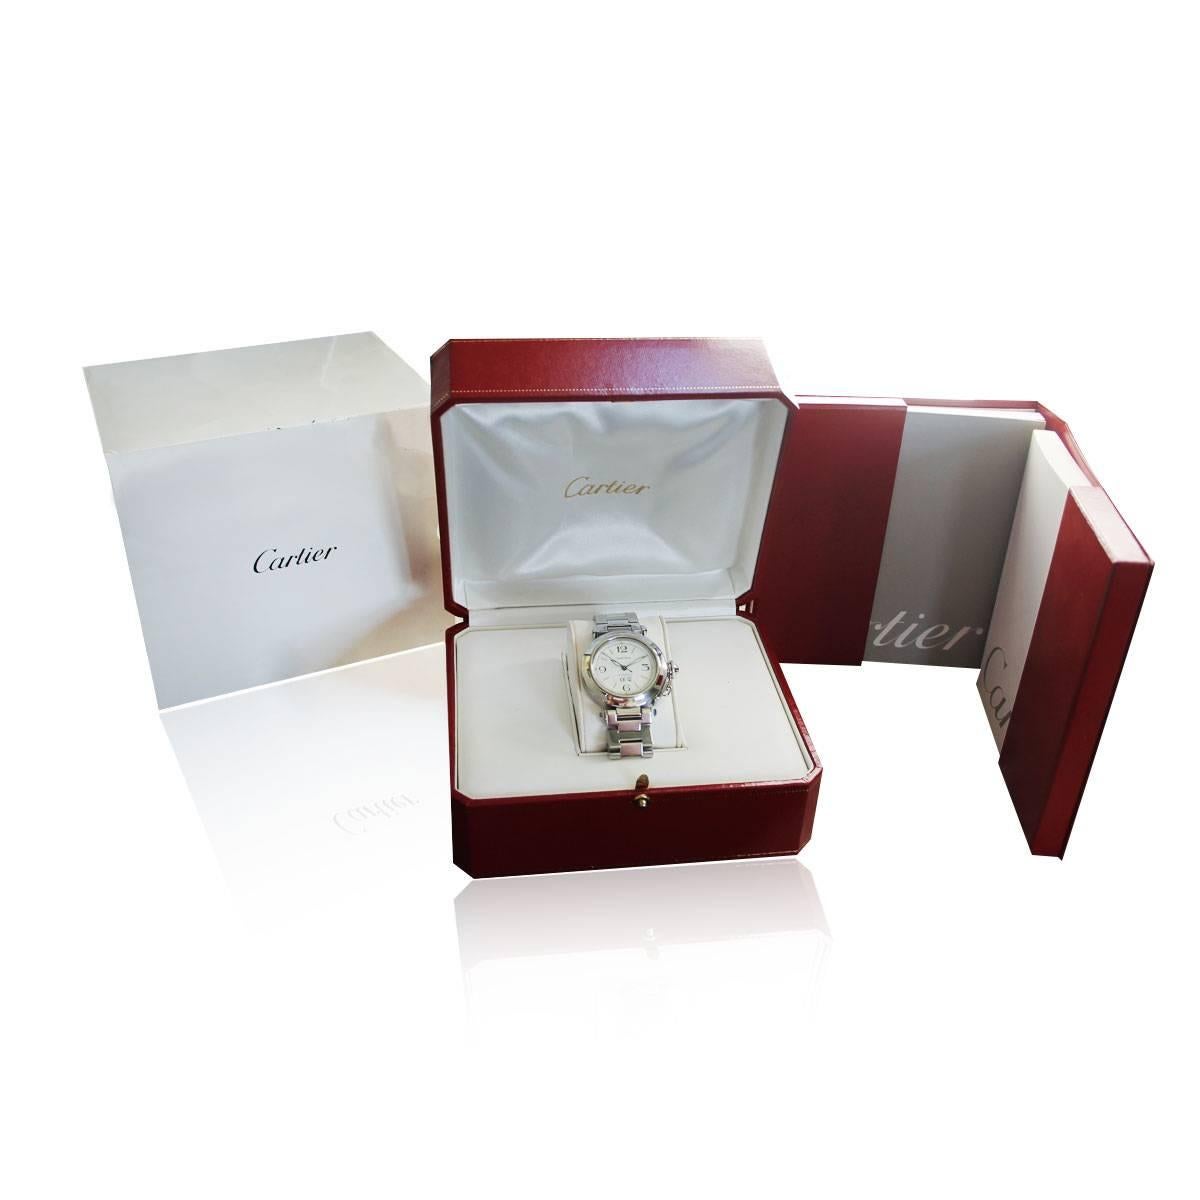 Cartier ladies Stainless Steel Pasha C Big Date Automatic Wristwatch 2